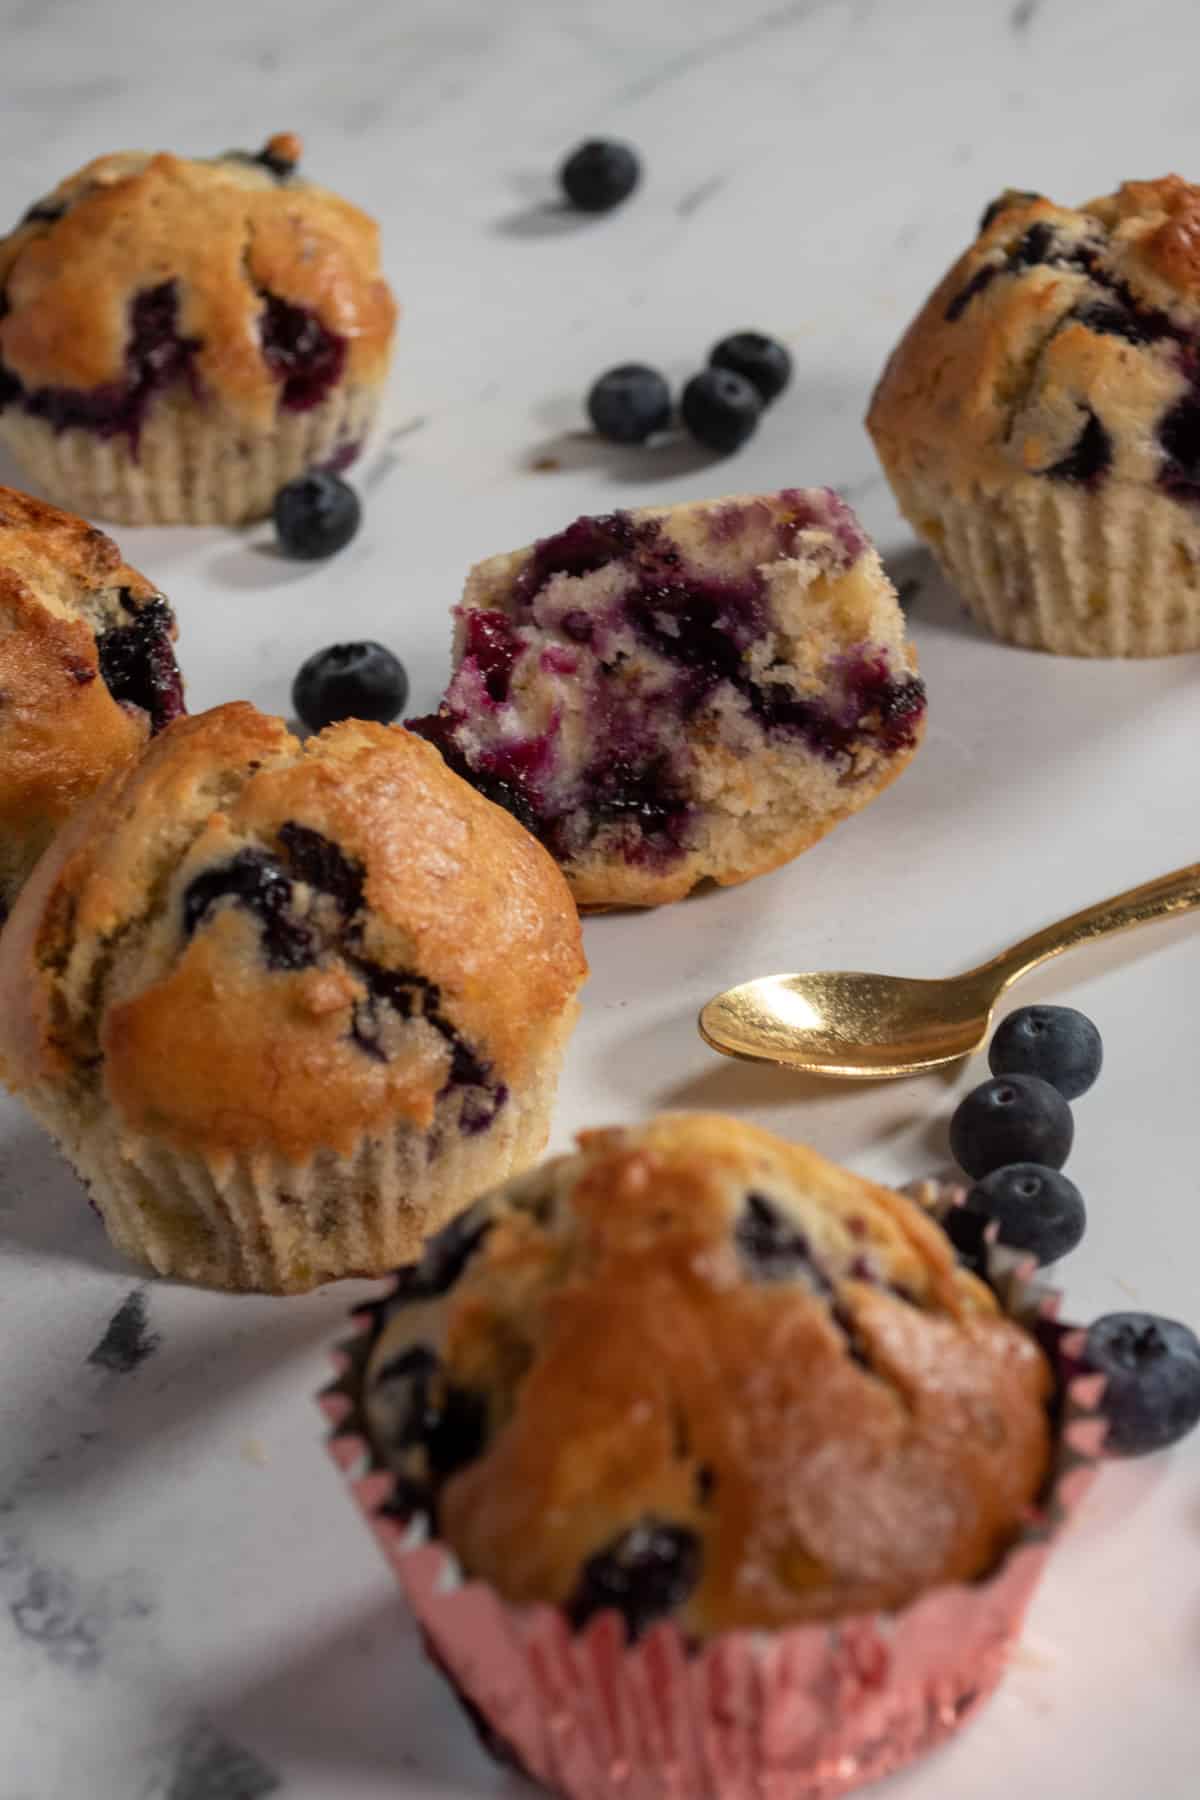 A shot of several muffins and that golden spoon again. Loose blueberries also on display. 